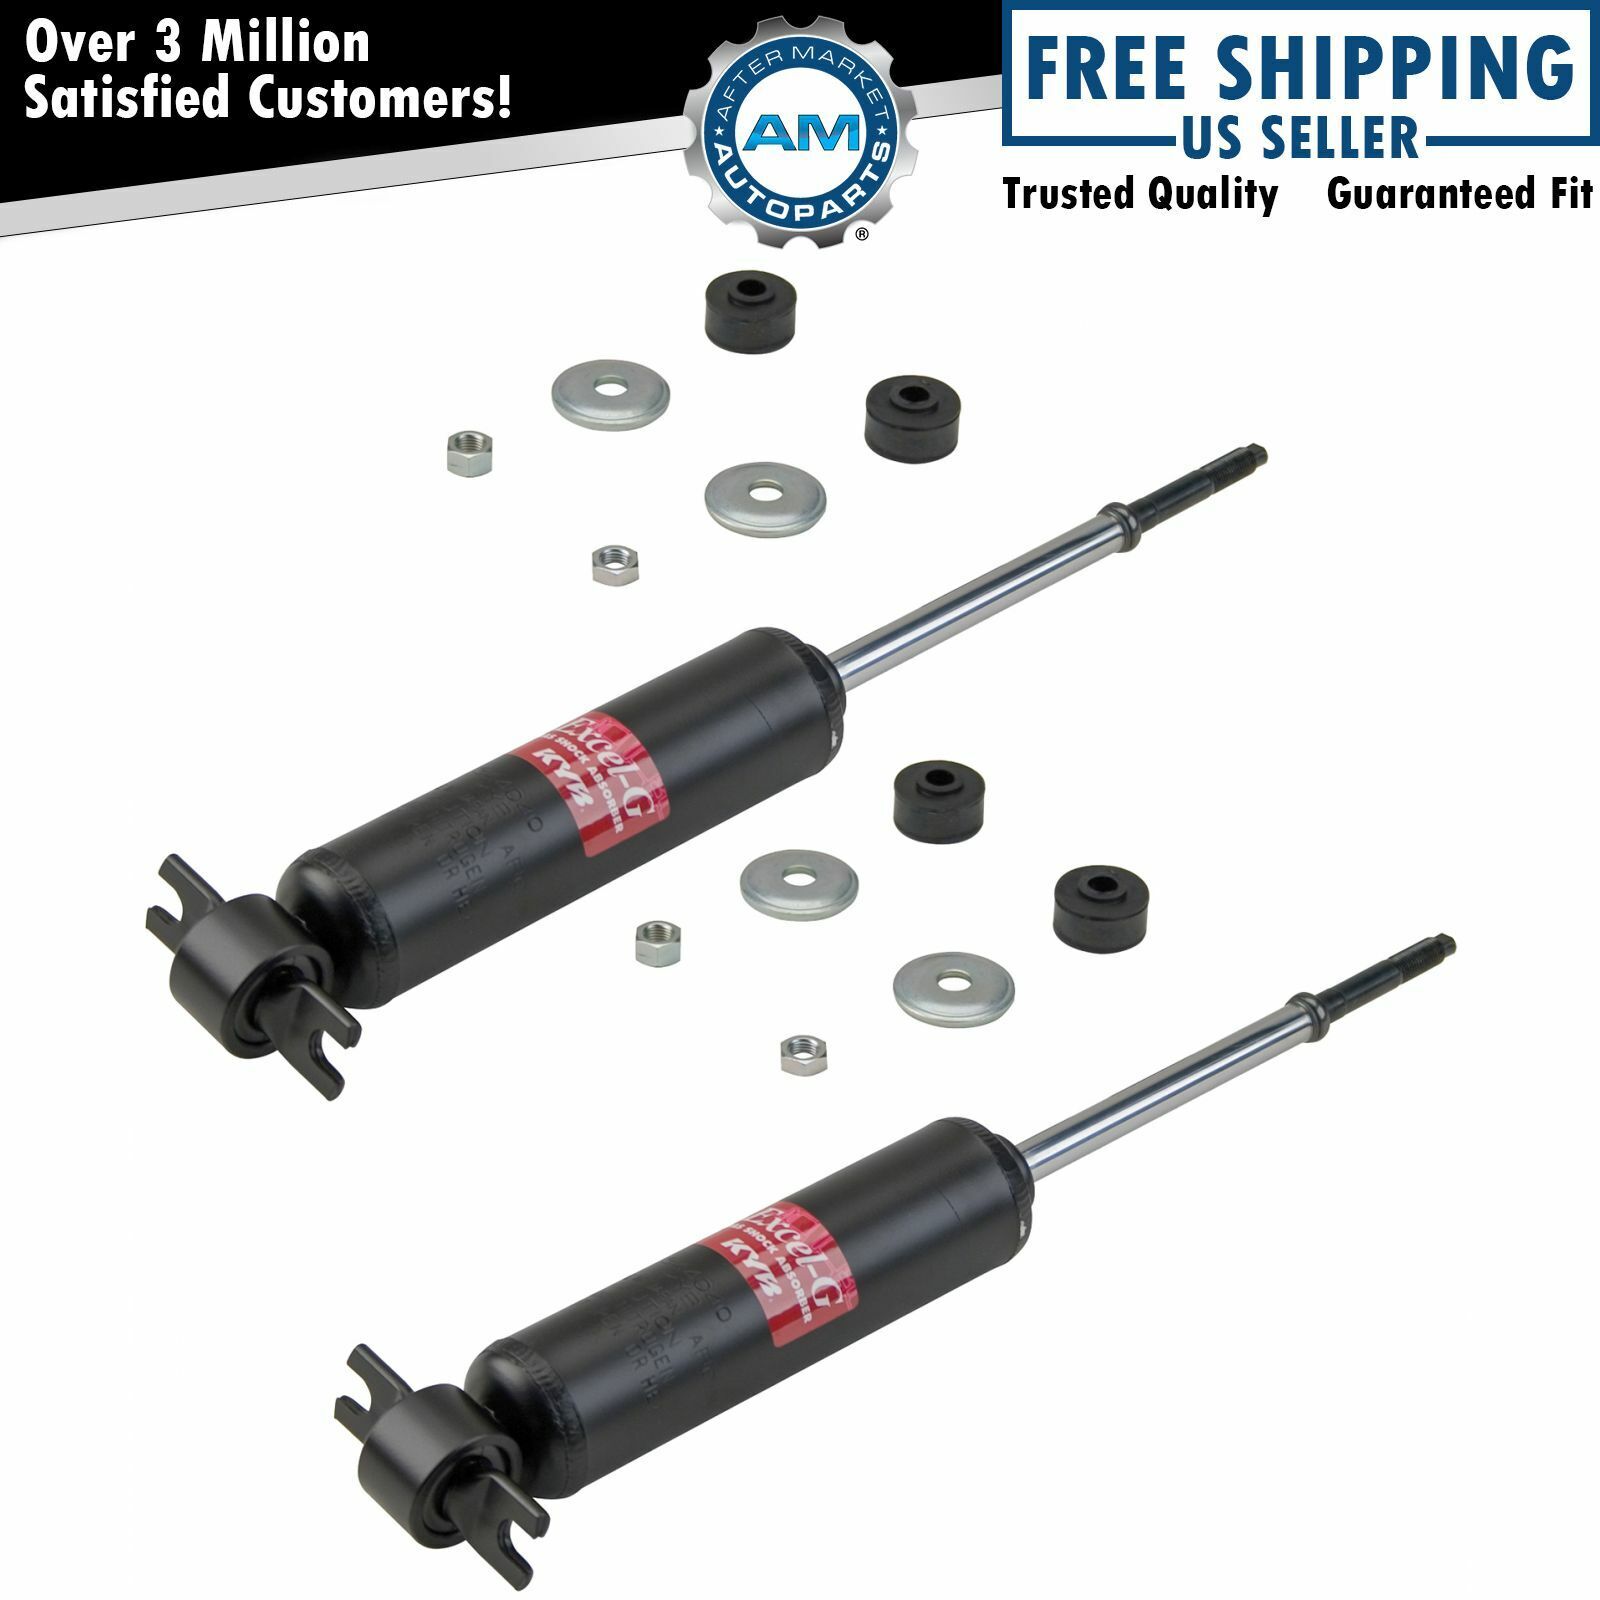 KYB Excel-G Front Shock Absorber Pair LH & RH Sides for Chevy Buick Ford Mazda